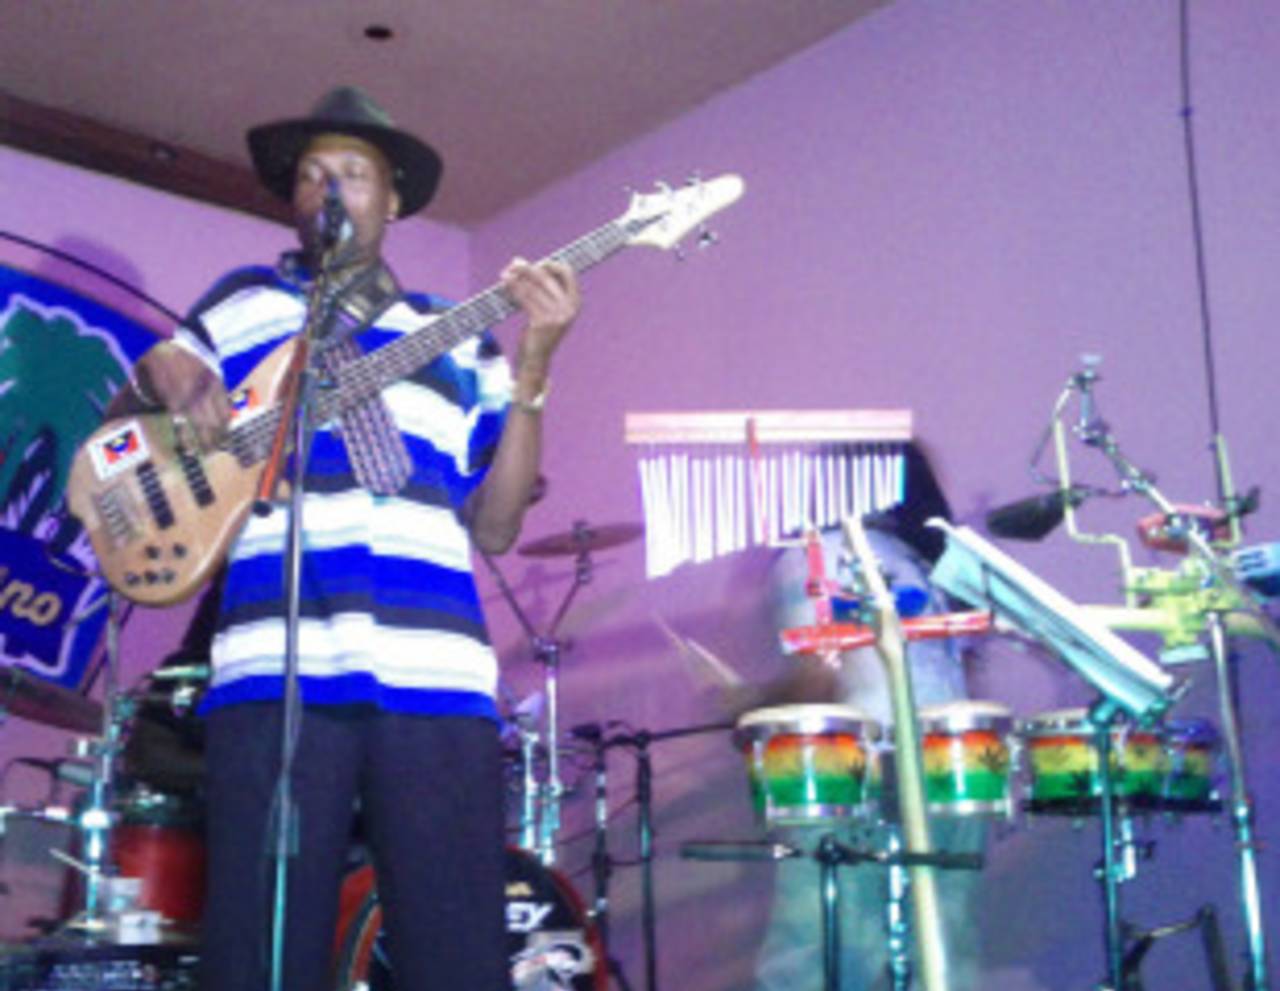 Curtly Ambrose performs with his band, Spirited, in Antigua